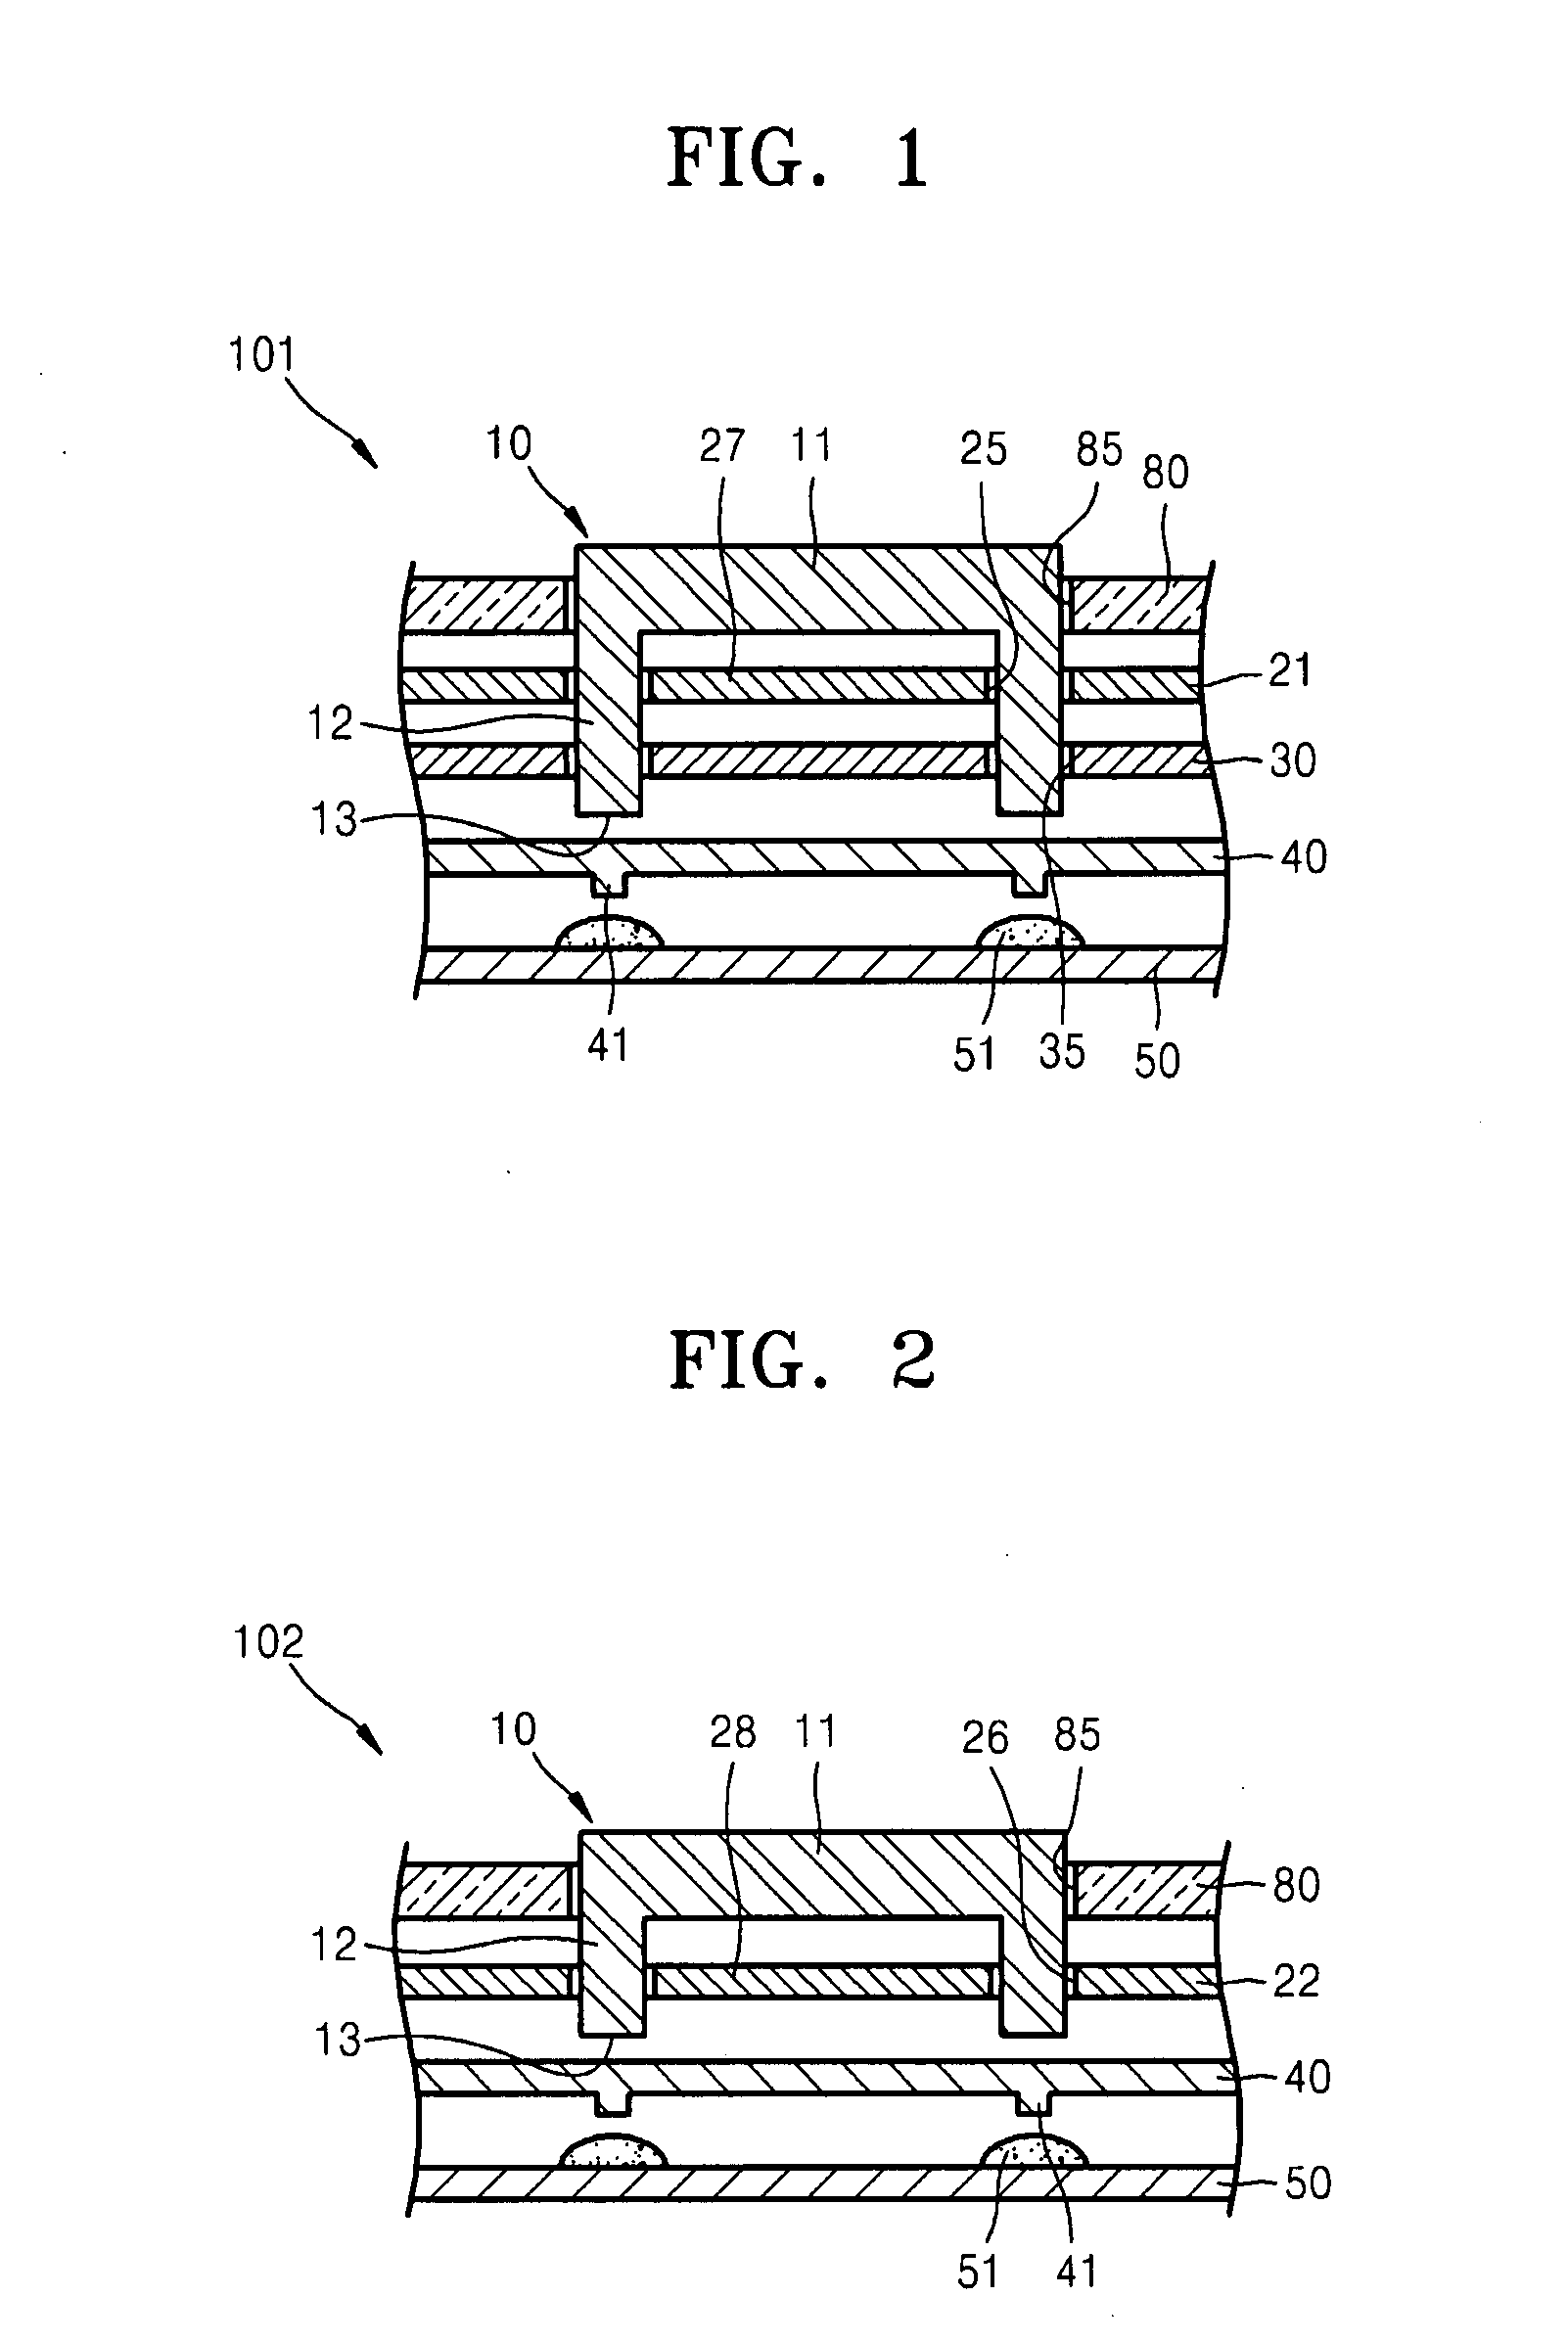 Button input device using E-paper